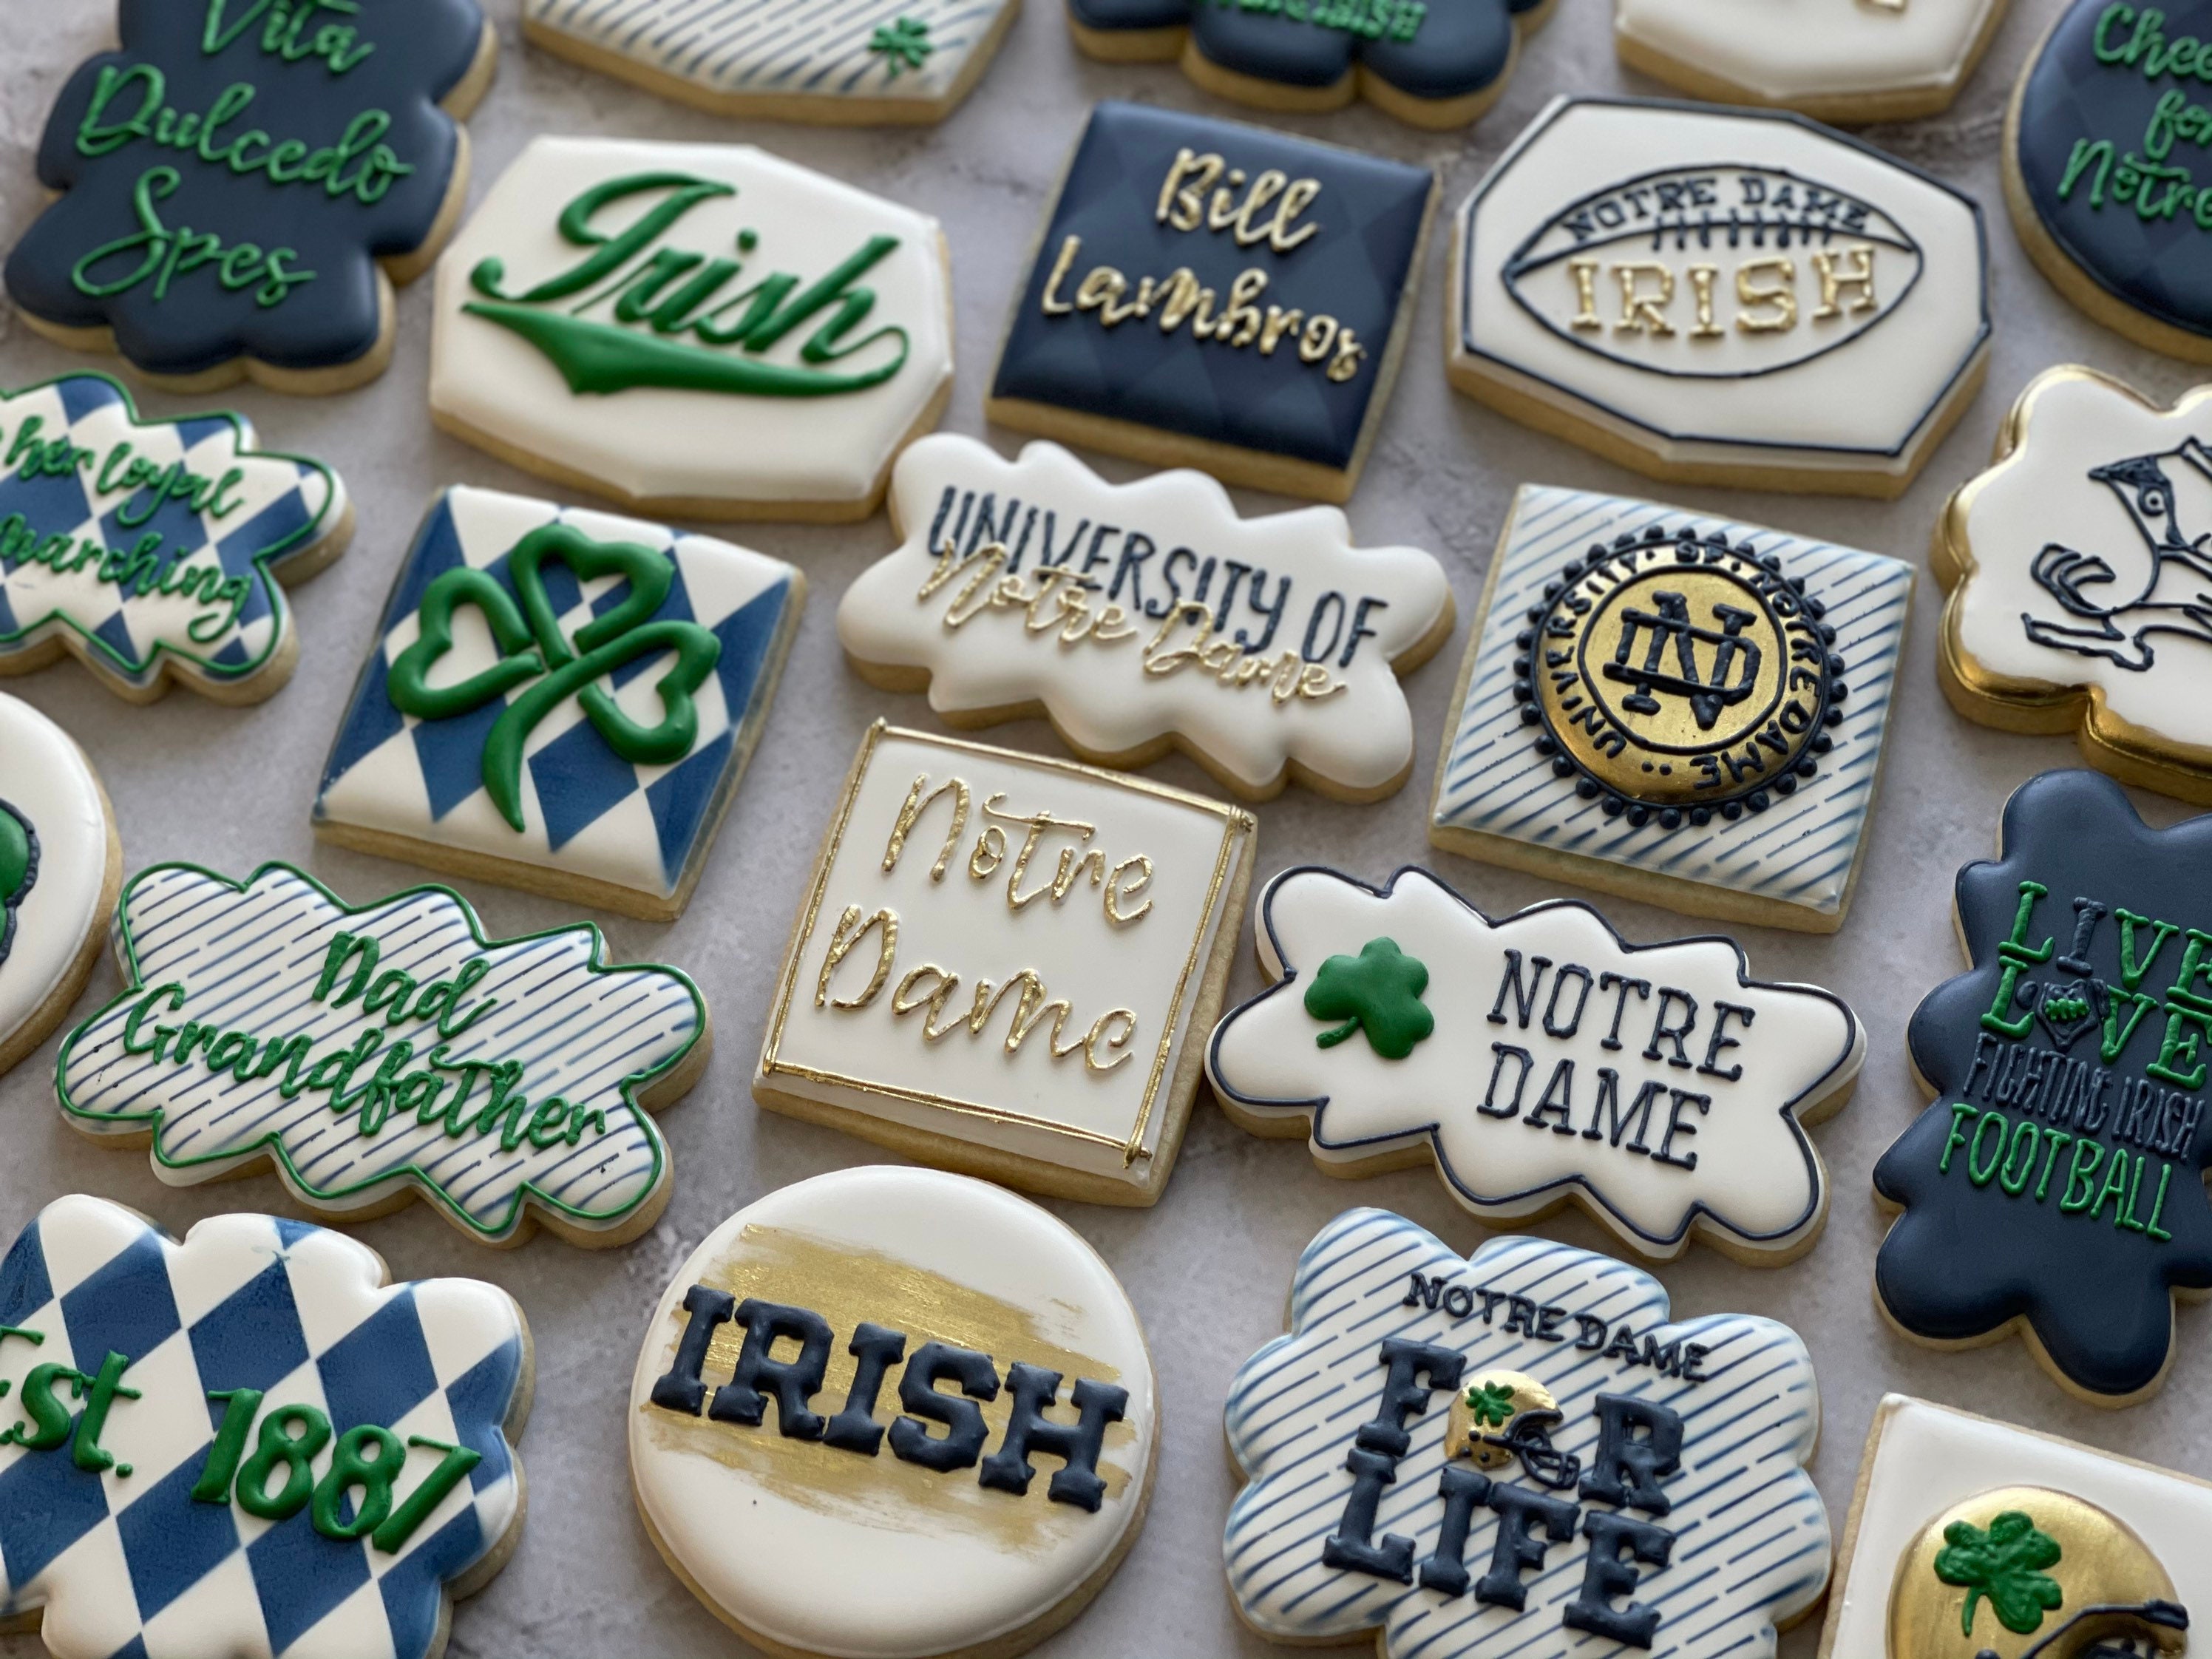 These custom made Louis Vuitton cookies are beautifully designed and  created for your viewing pleasure! If you would like your company or event  to be